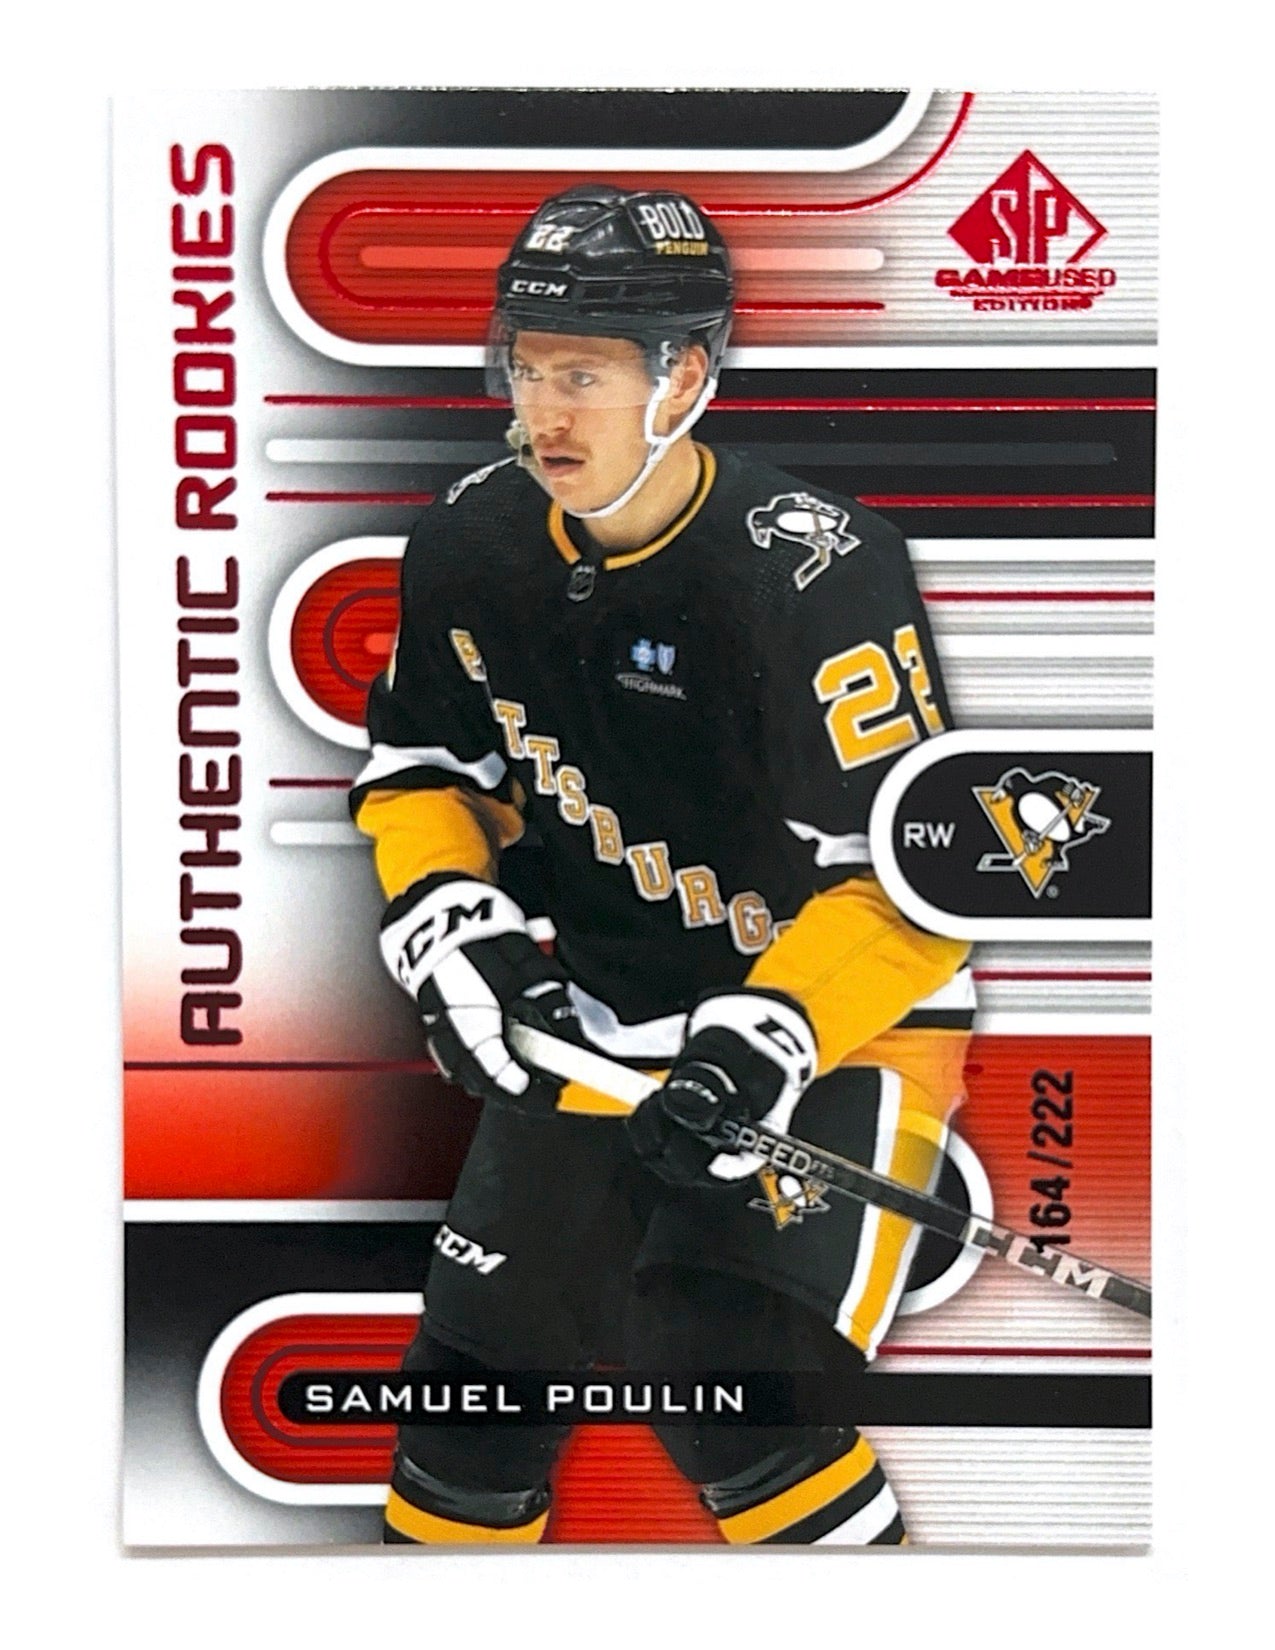 Samuel Poulin 2022-23 Upper Deck SP Game Used Authentic Rookies #228 - 164/222